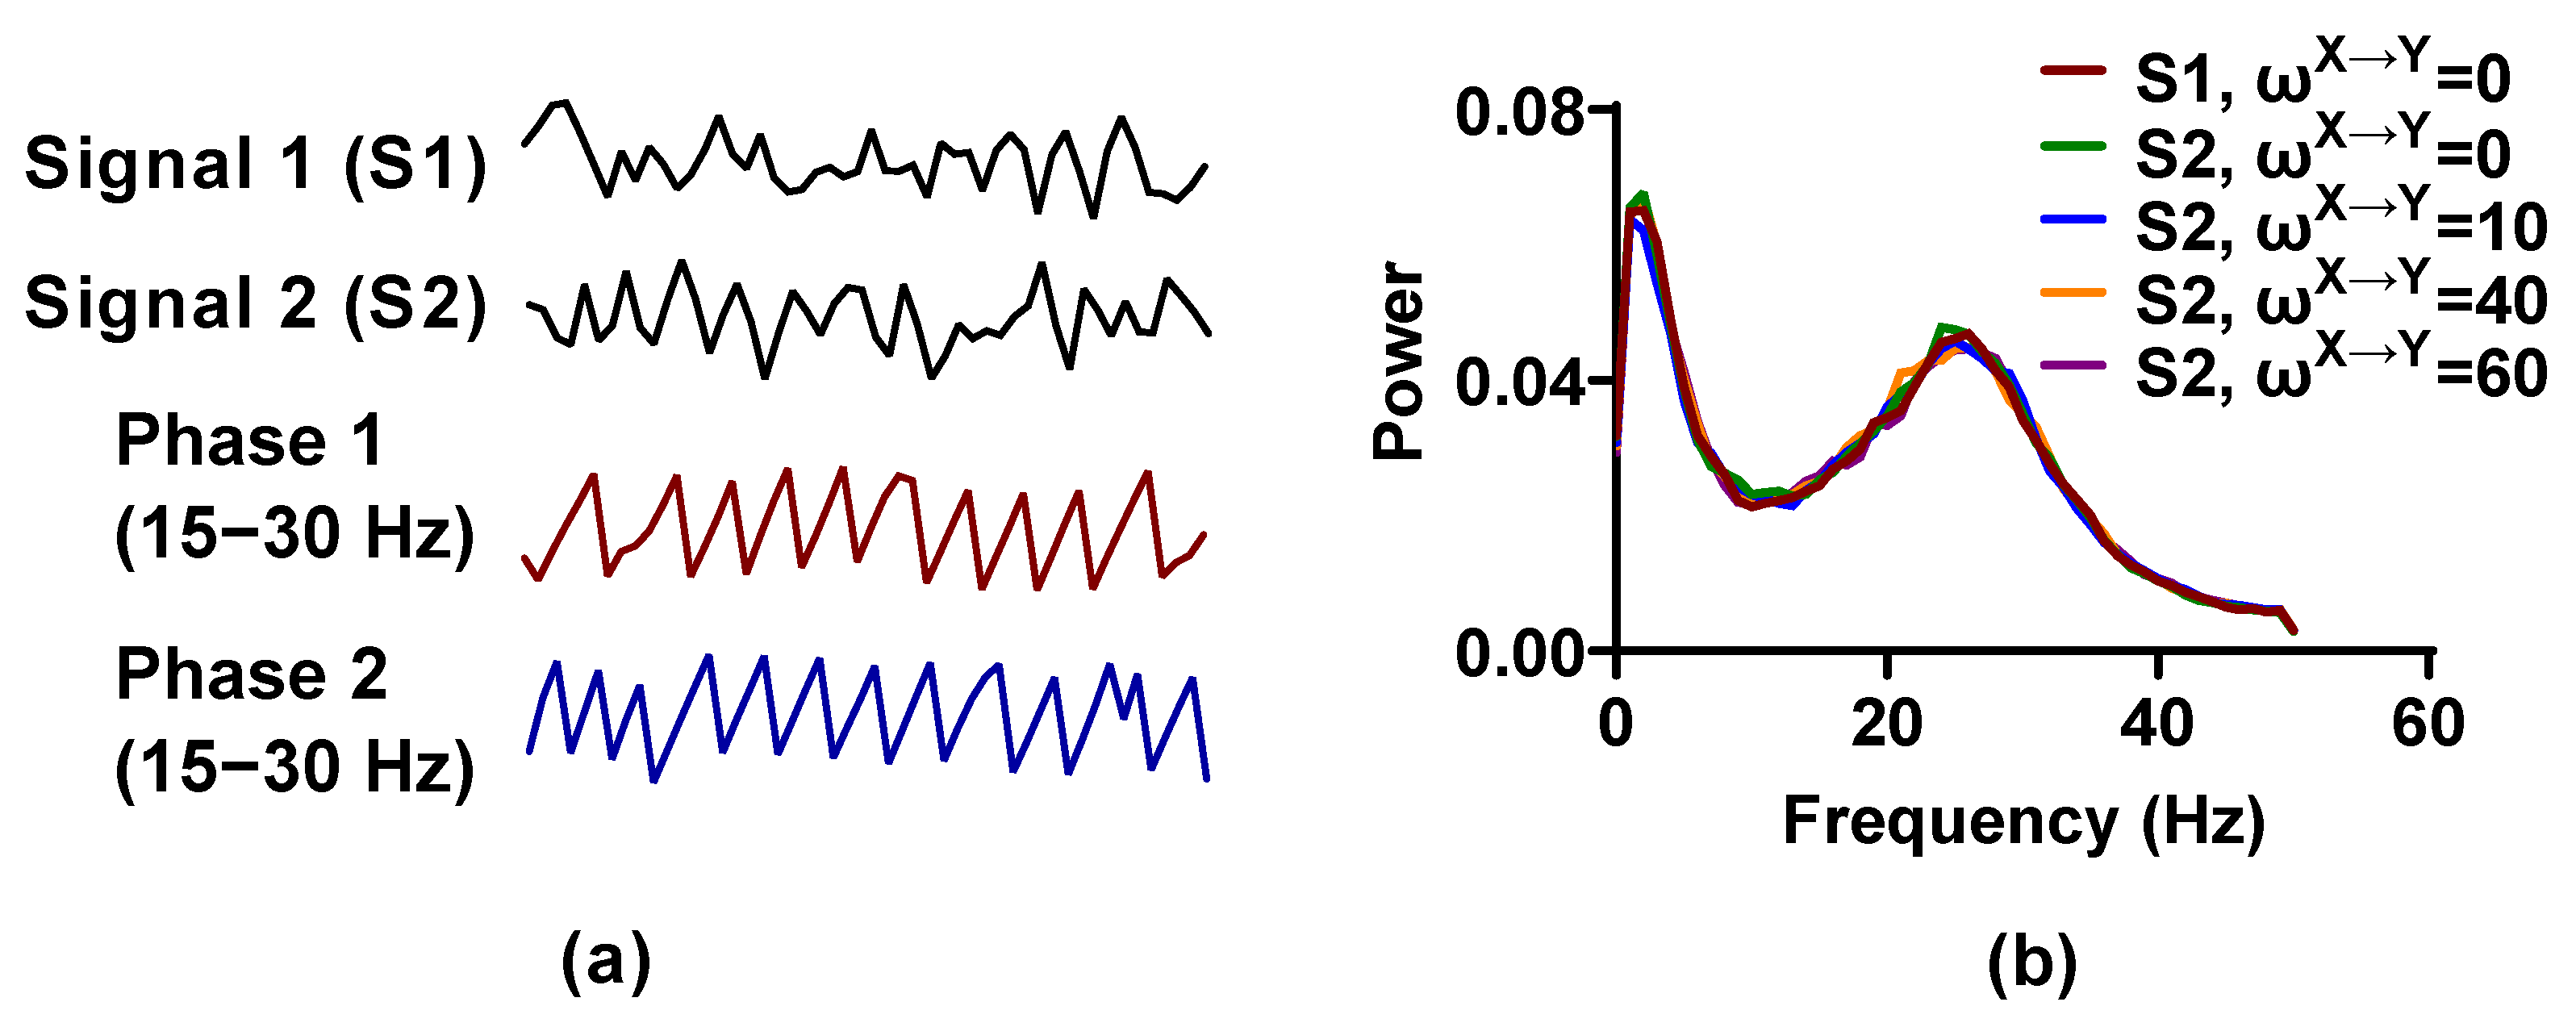 Examples of the response of single NMM column to oscillatory